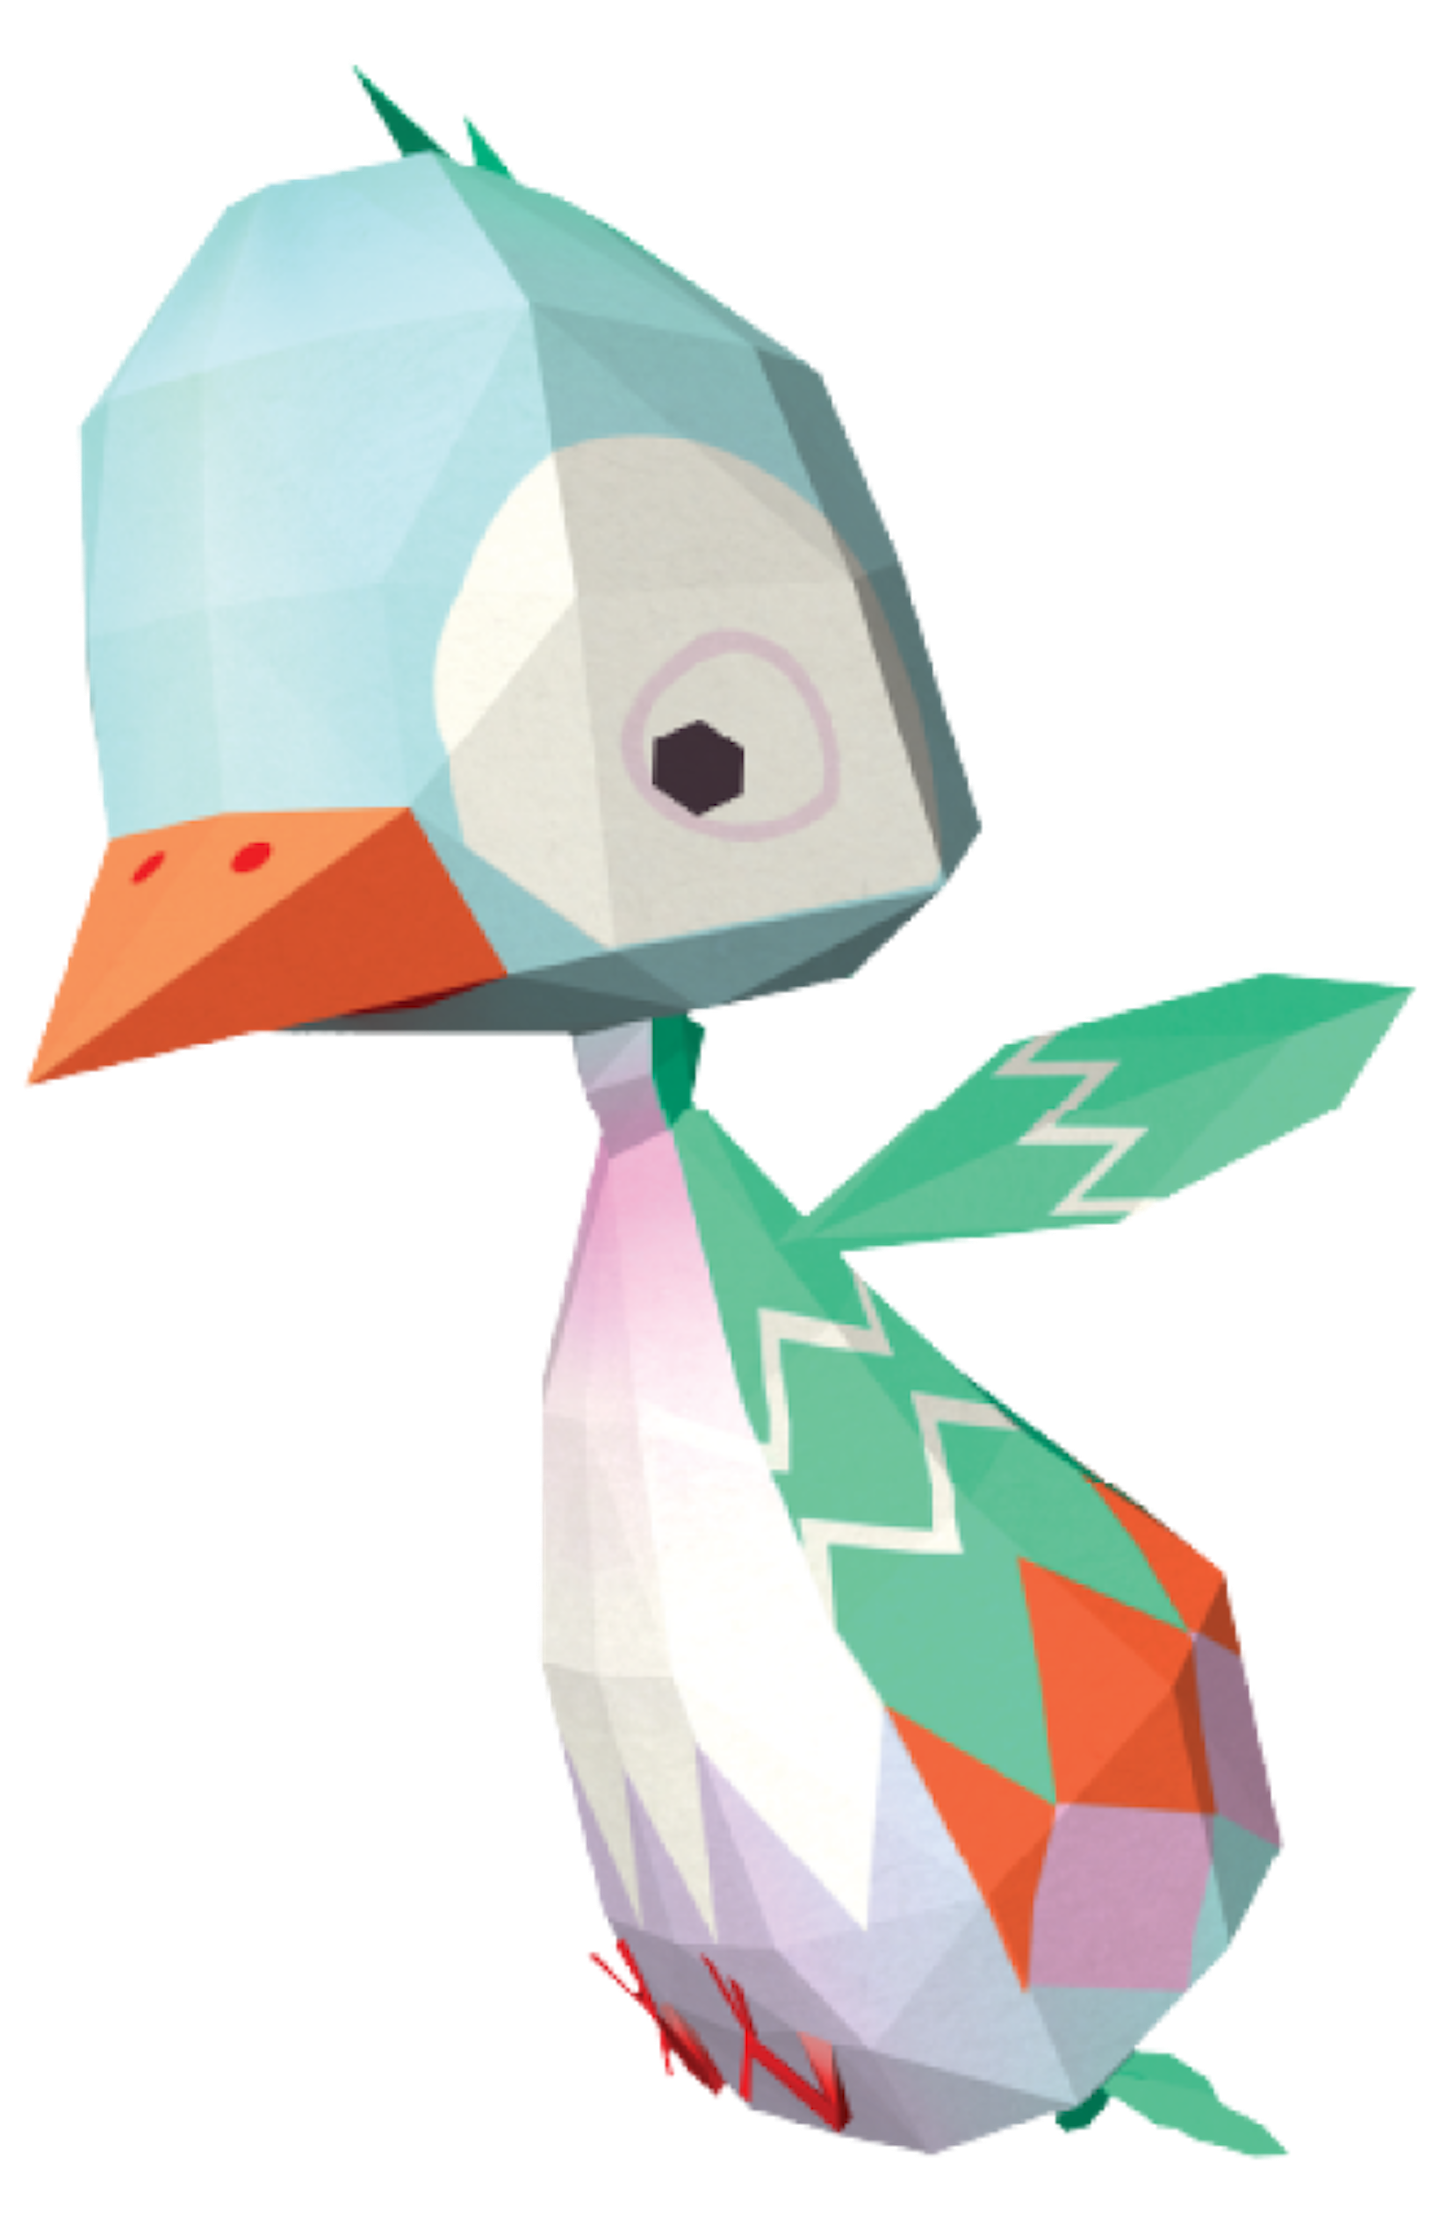 This is a poly shaped bird asset